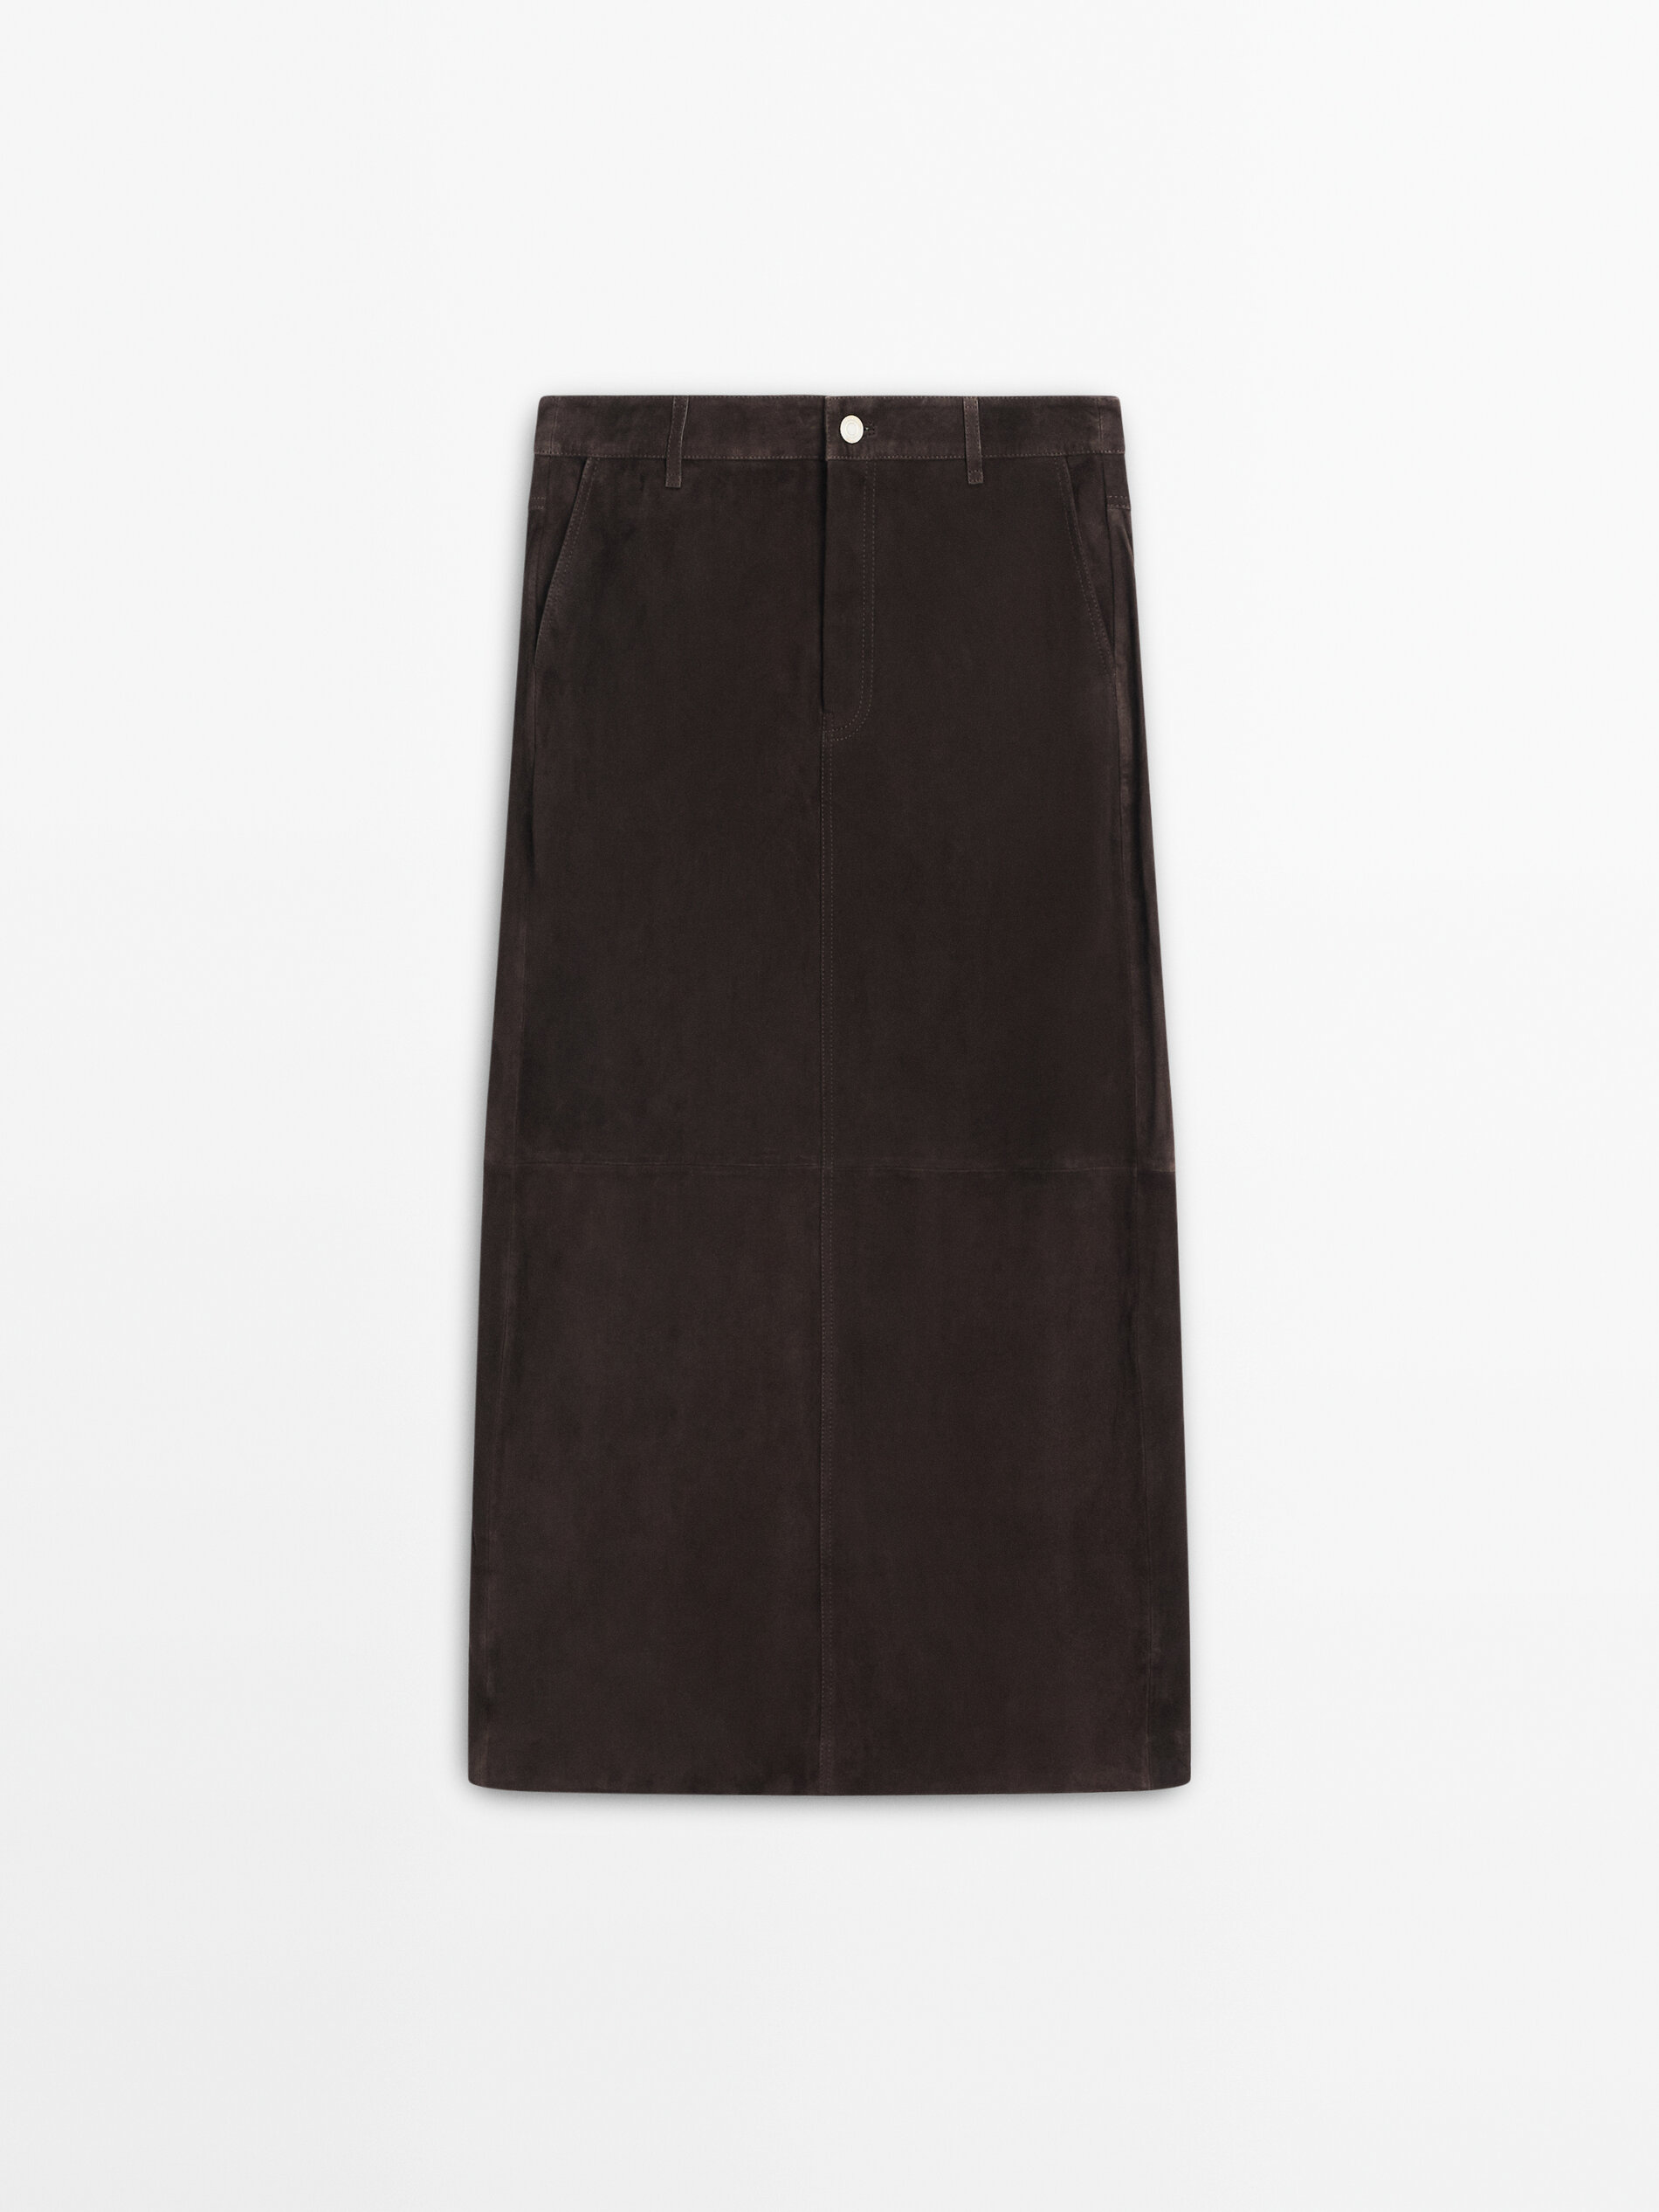 LONG SUEDE LEATHER SKIRT WITH POCKETS